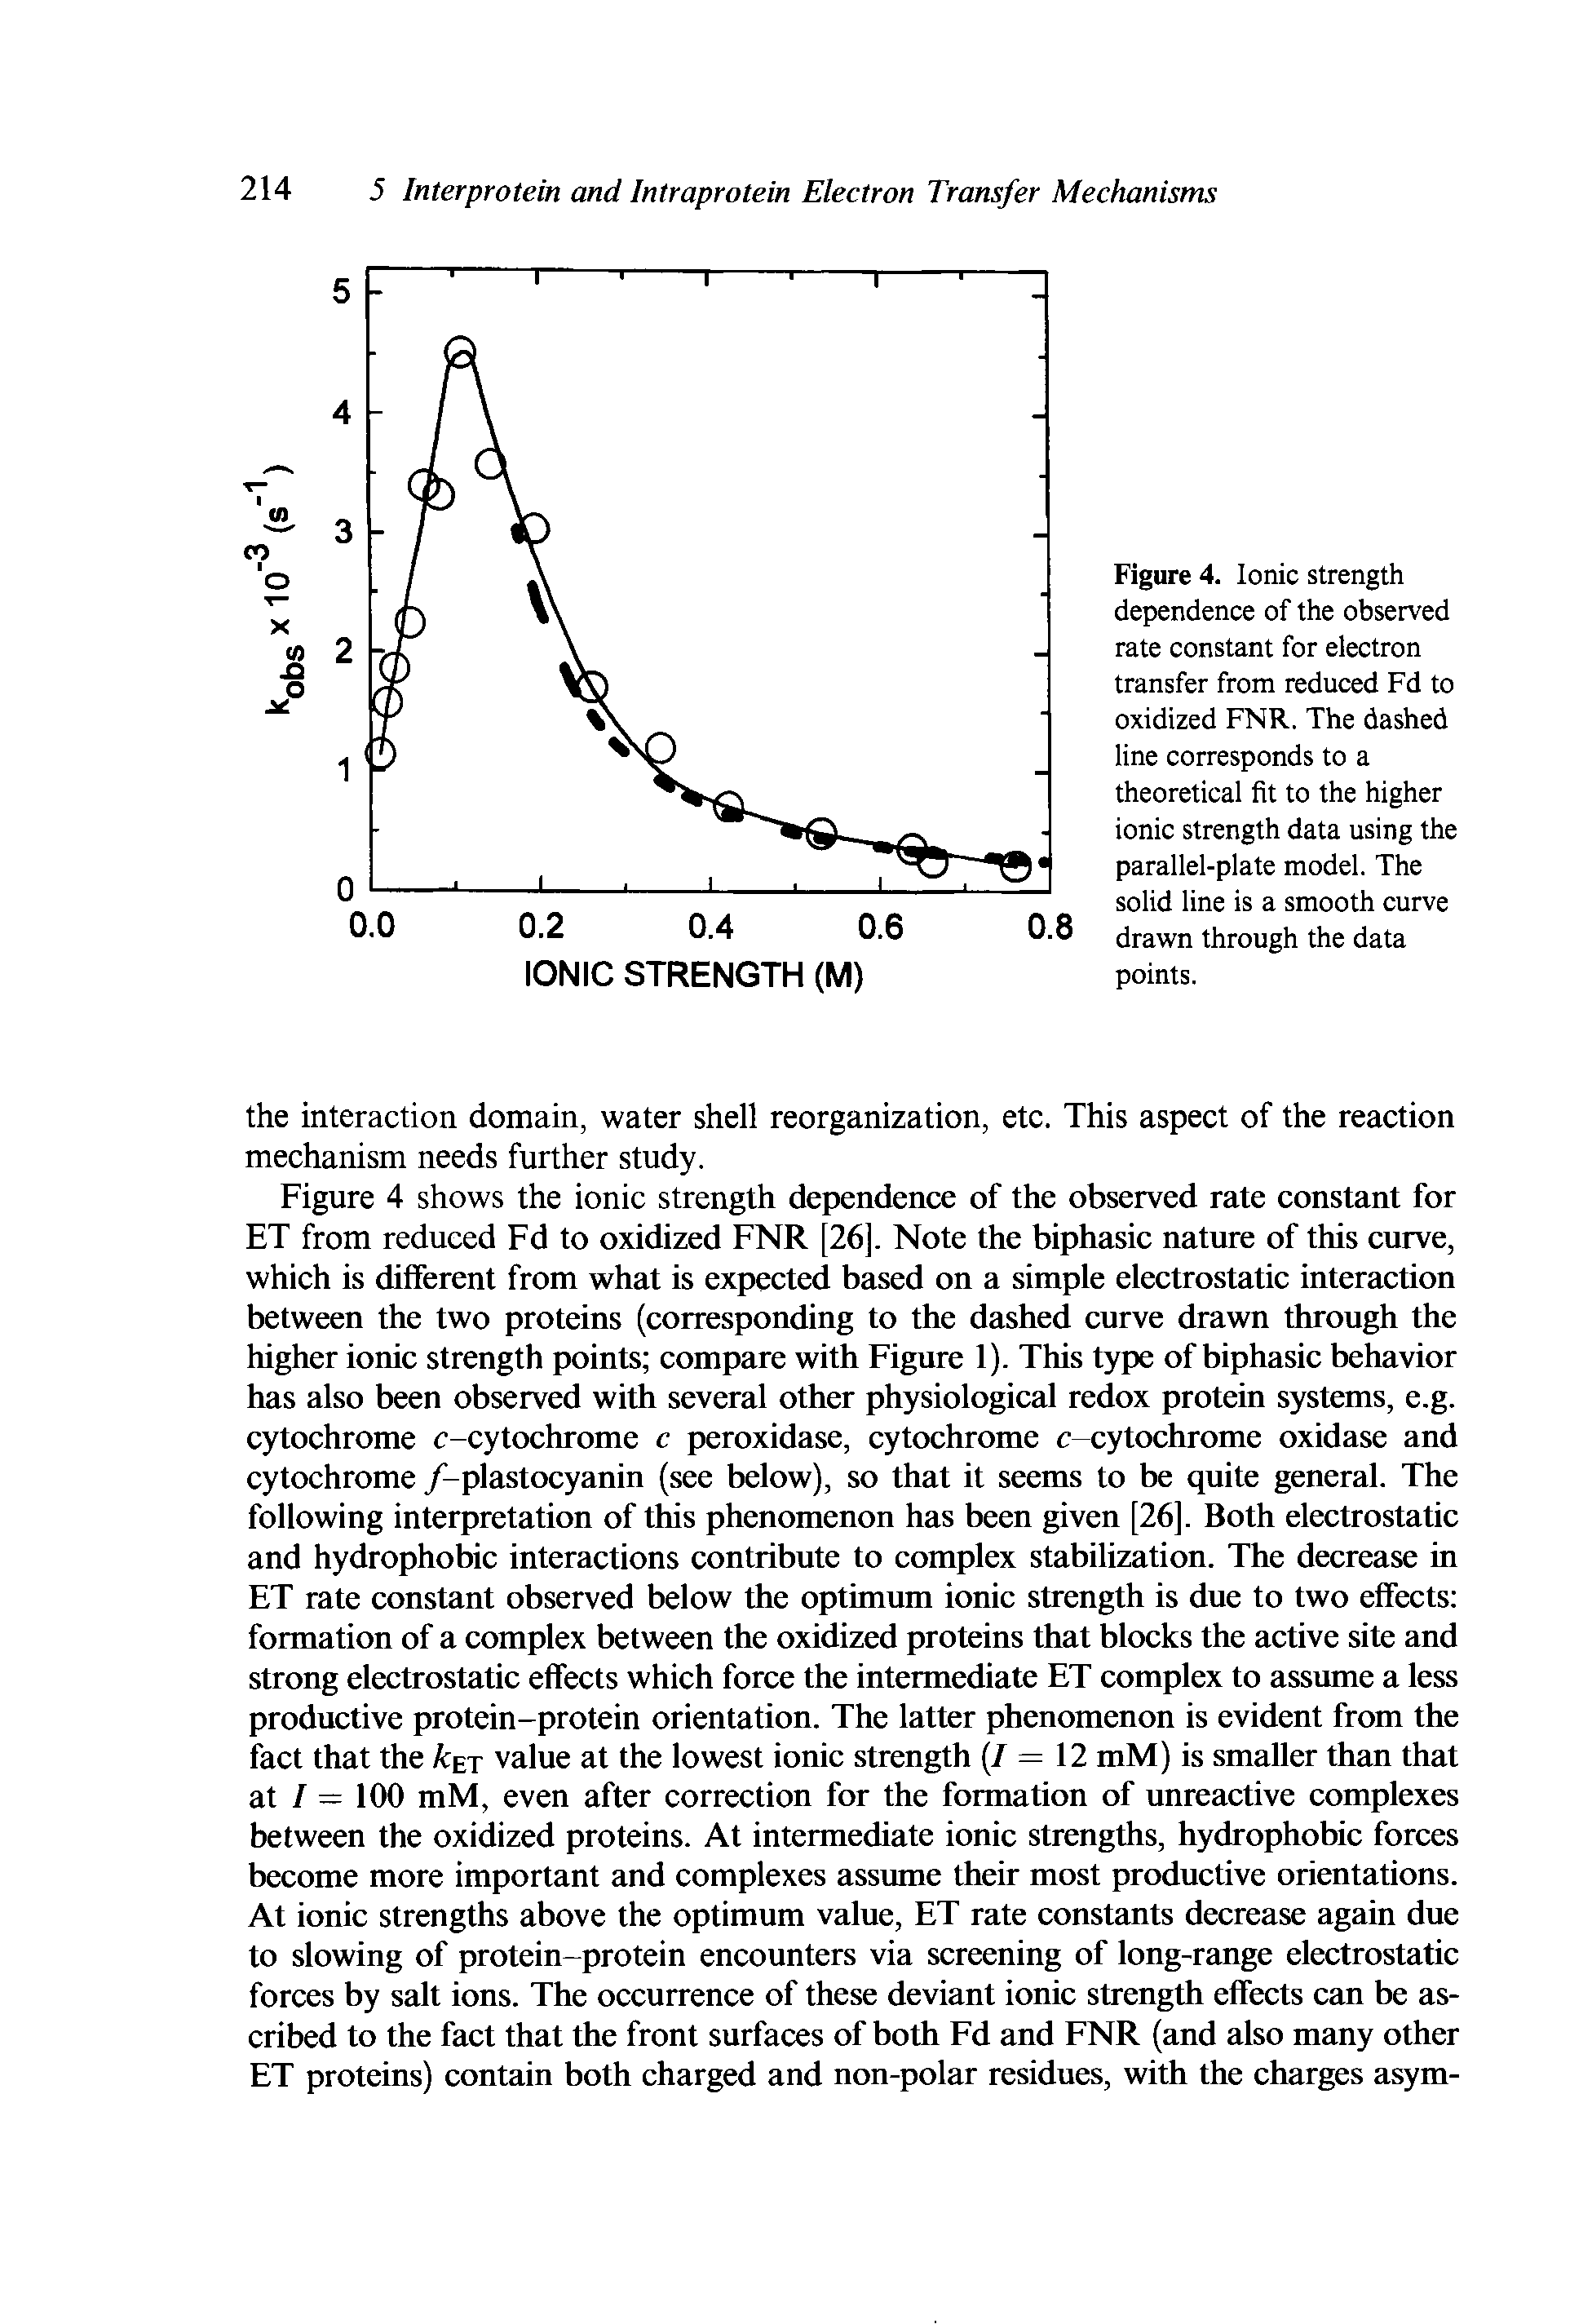 Figure 4. Ionic strength dependence of the observed rate constant for electron transfer from reduced Fd to oxidized FNR. The dashed line corresponds to a theoretical fit to the higher ionic strength data using the parallel-plate model. The solid line is a smooth curve drawn through the data points.